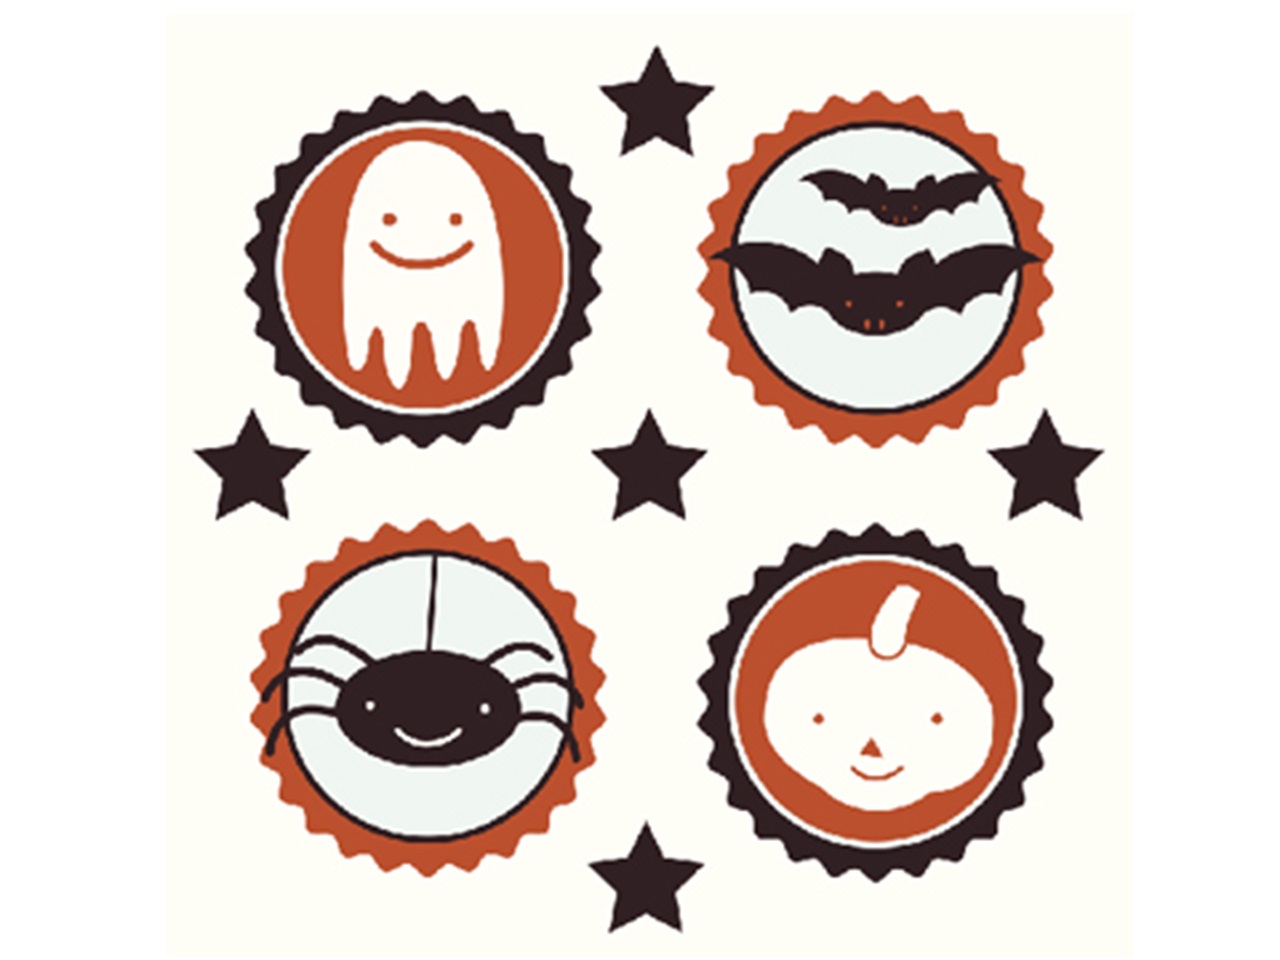 Temporary tattoos for trick-or-treating